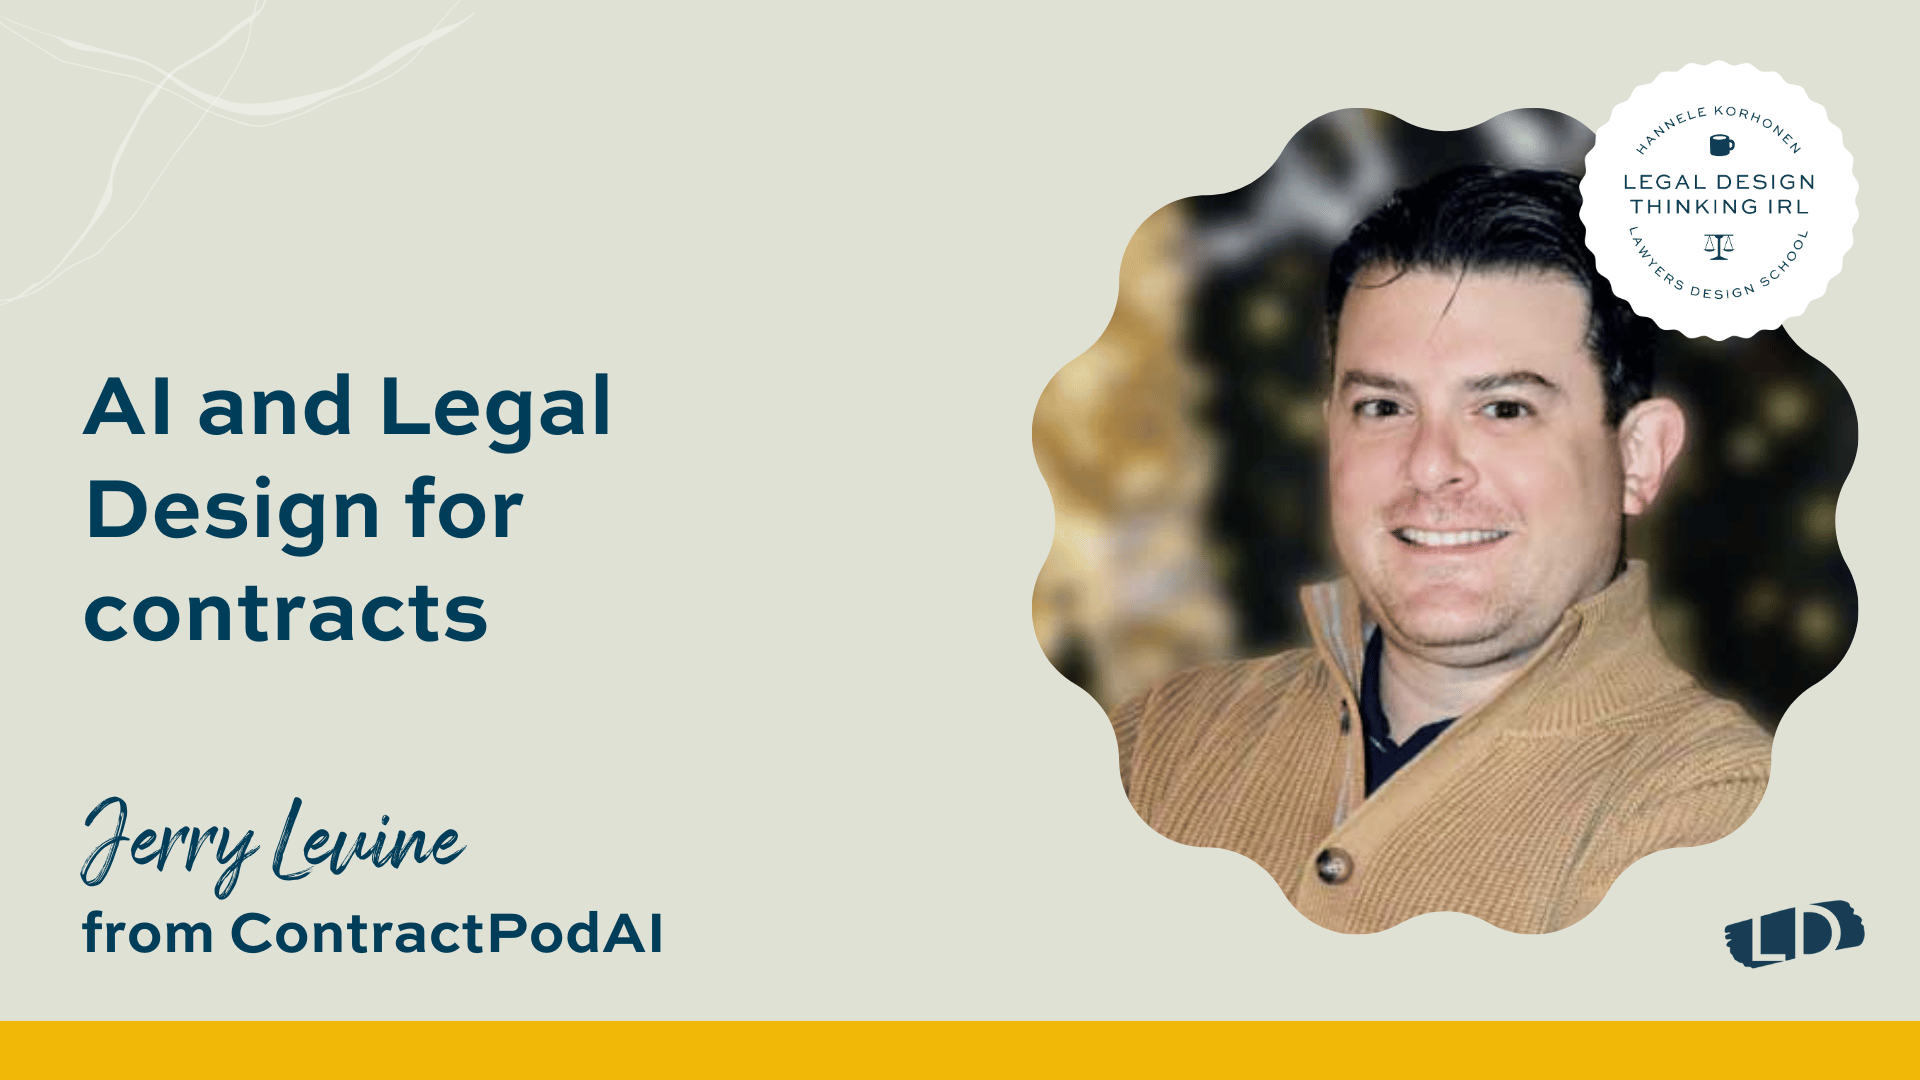 AI and Legal Design for contracts - Jerry Levine, from ContractPodAi